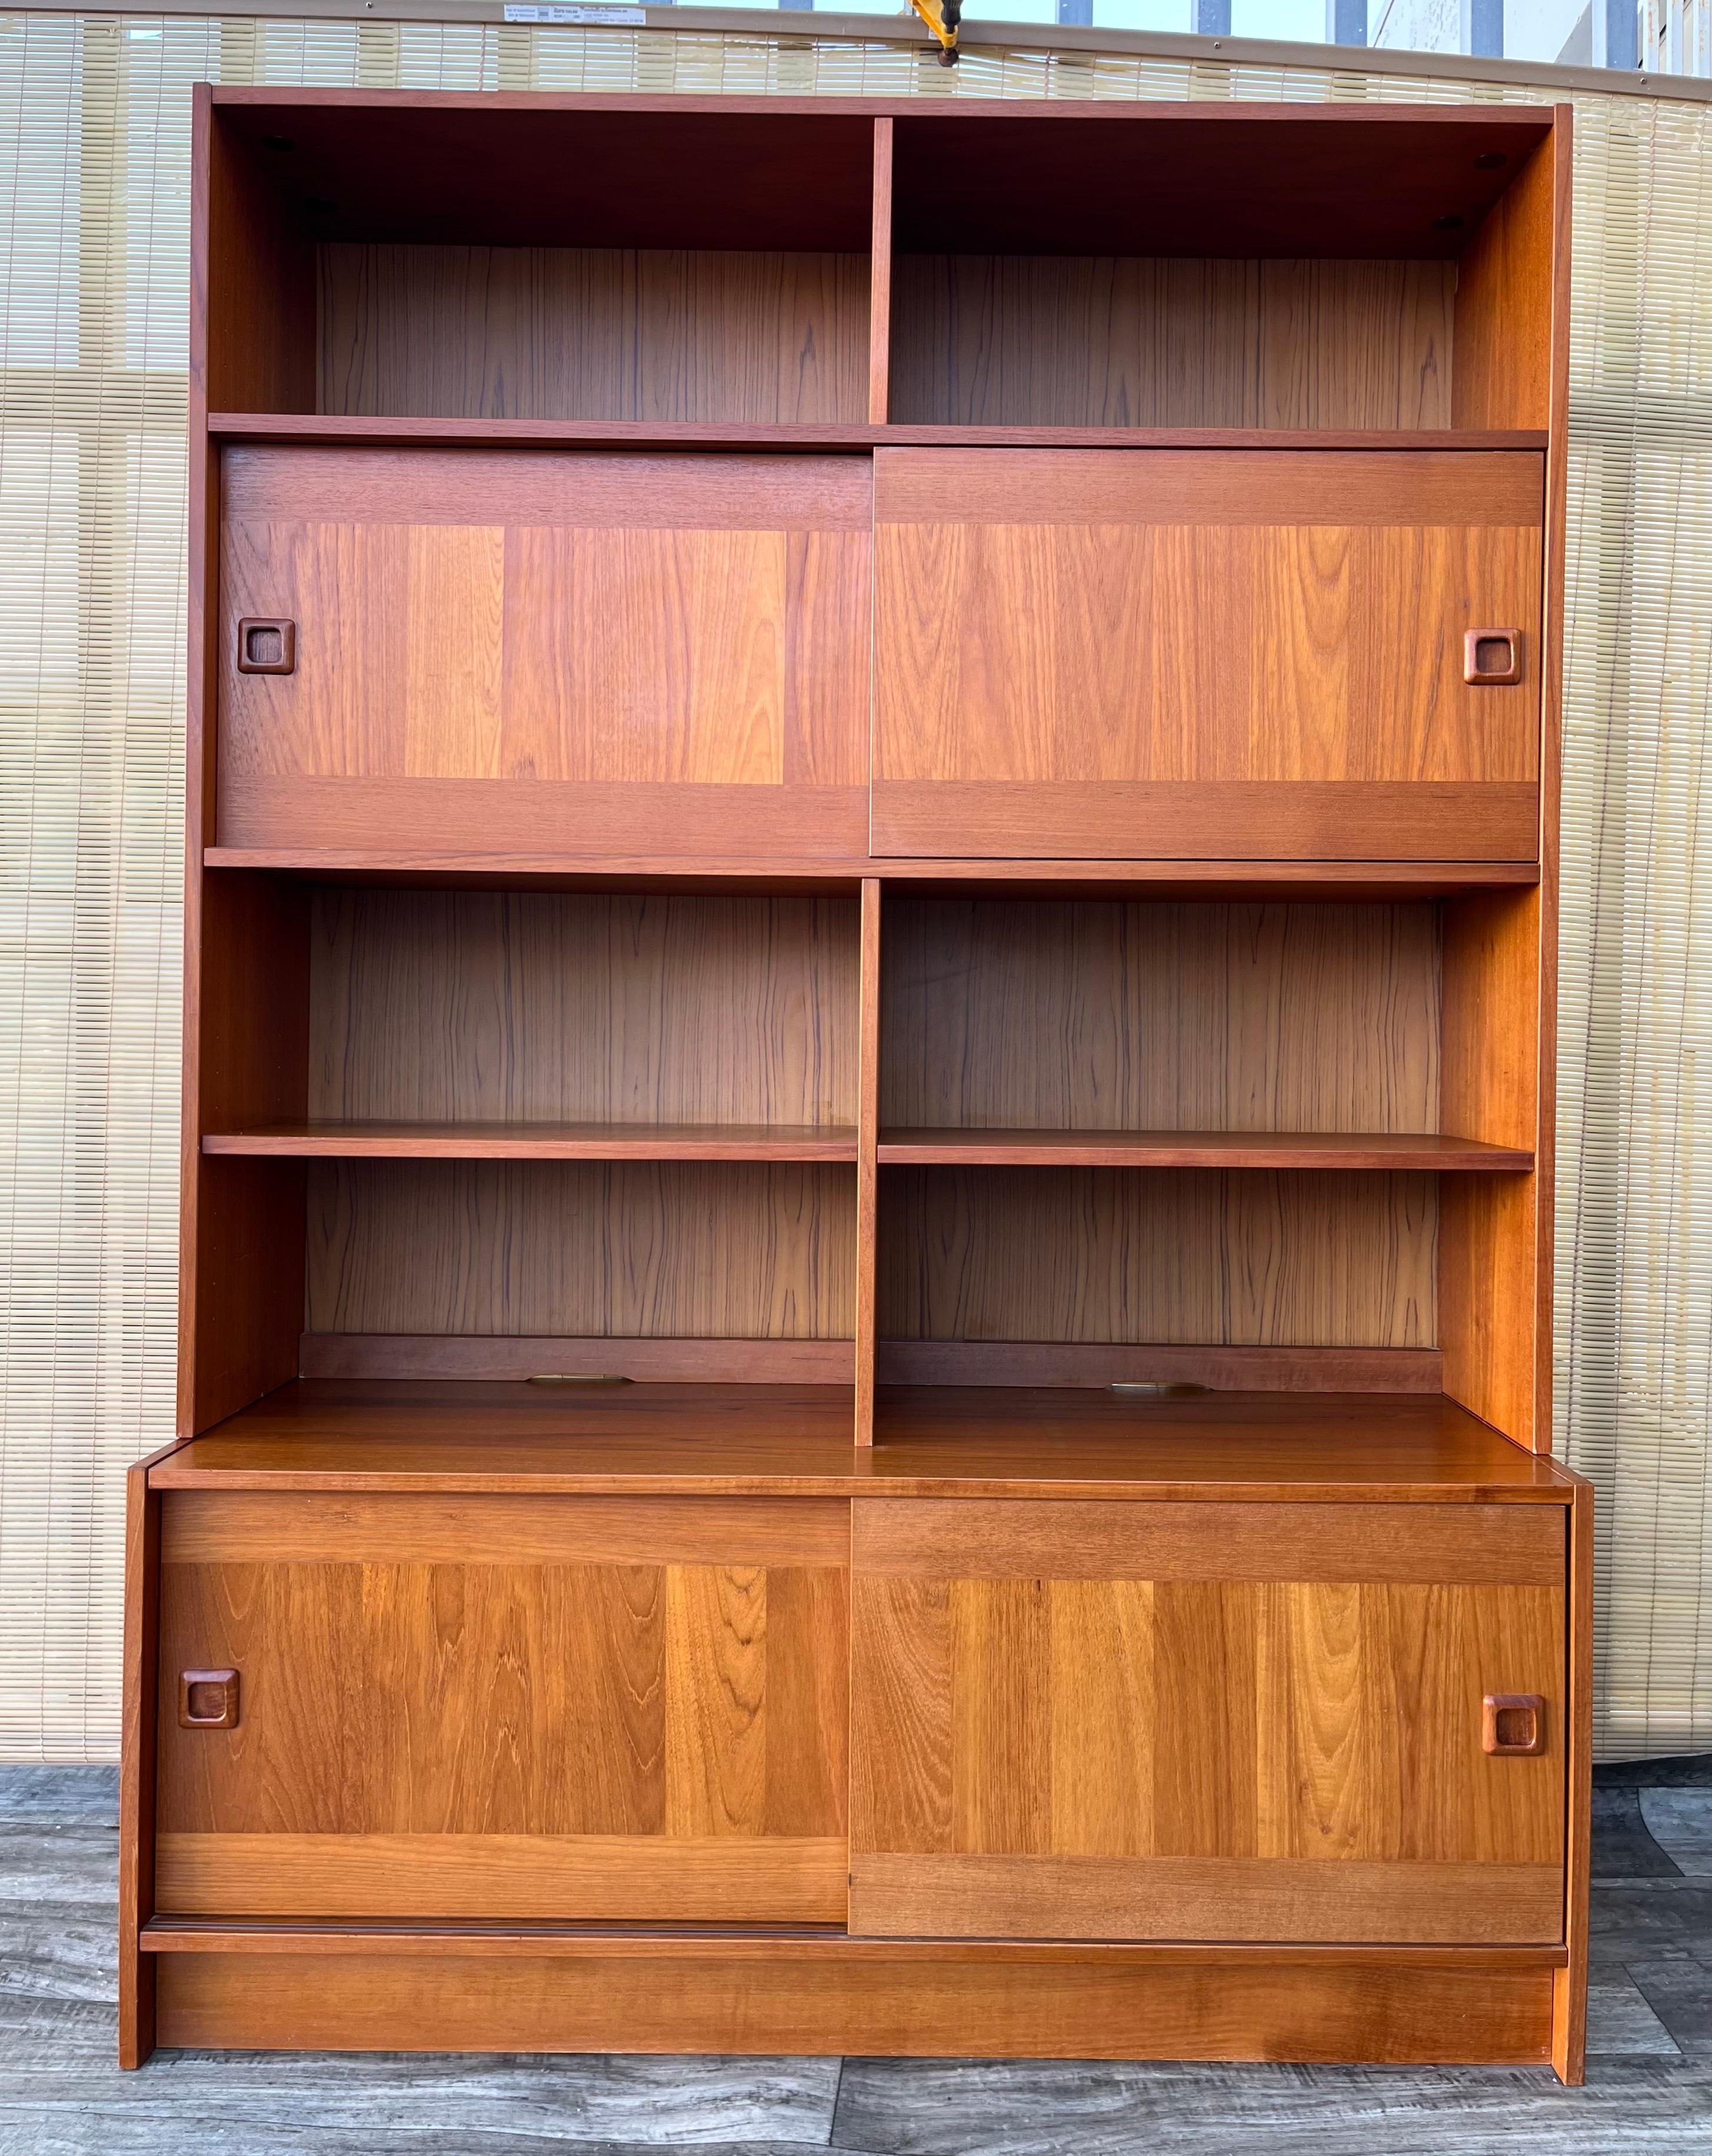 Vintage Danish Mid Century Modern Shelving Cabinet by Domino Mobler Denmark. Circa 1970s
Features a sleek Scandinavian Mid Century Modern design, a beautiful teak wood grain, two compartments with sliding doors and plenty of additional storage with